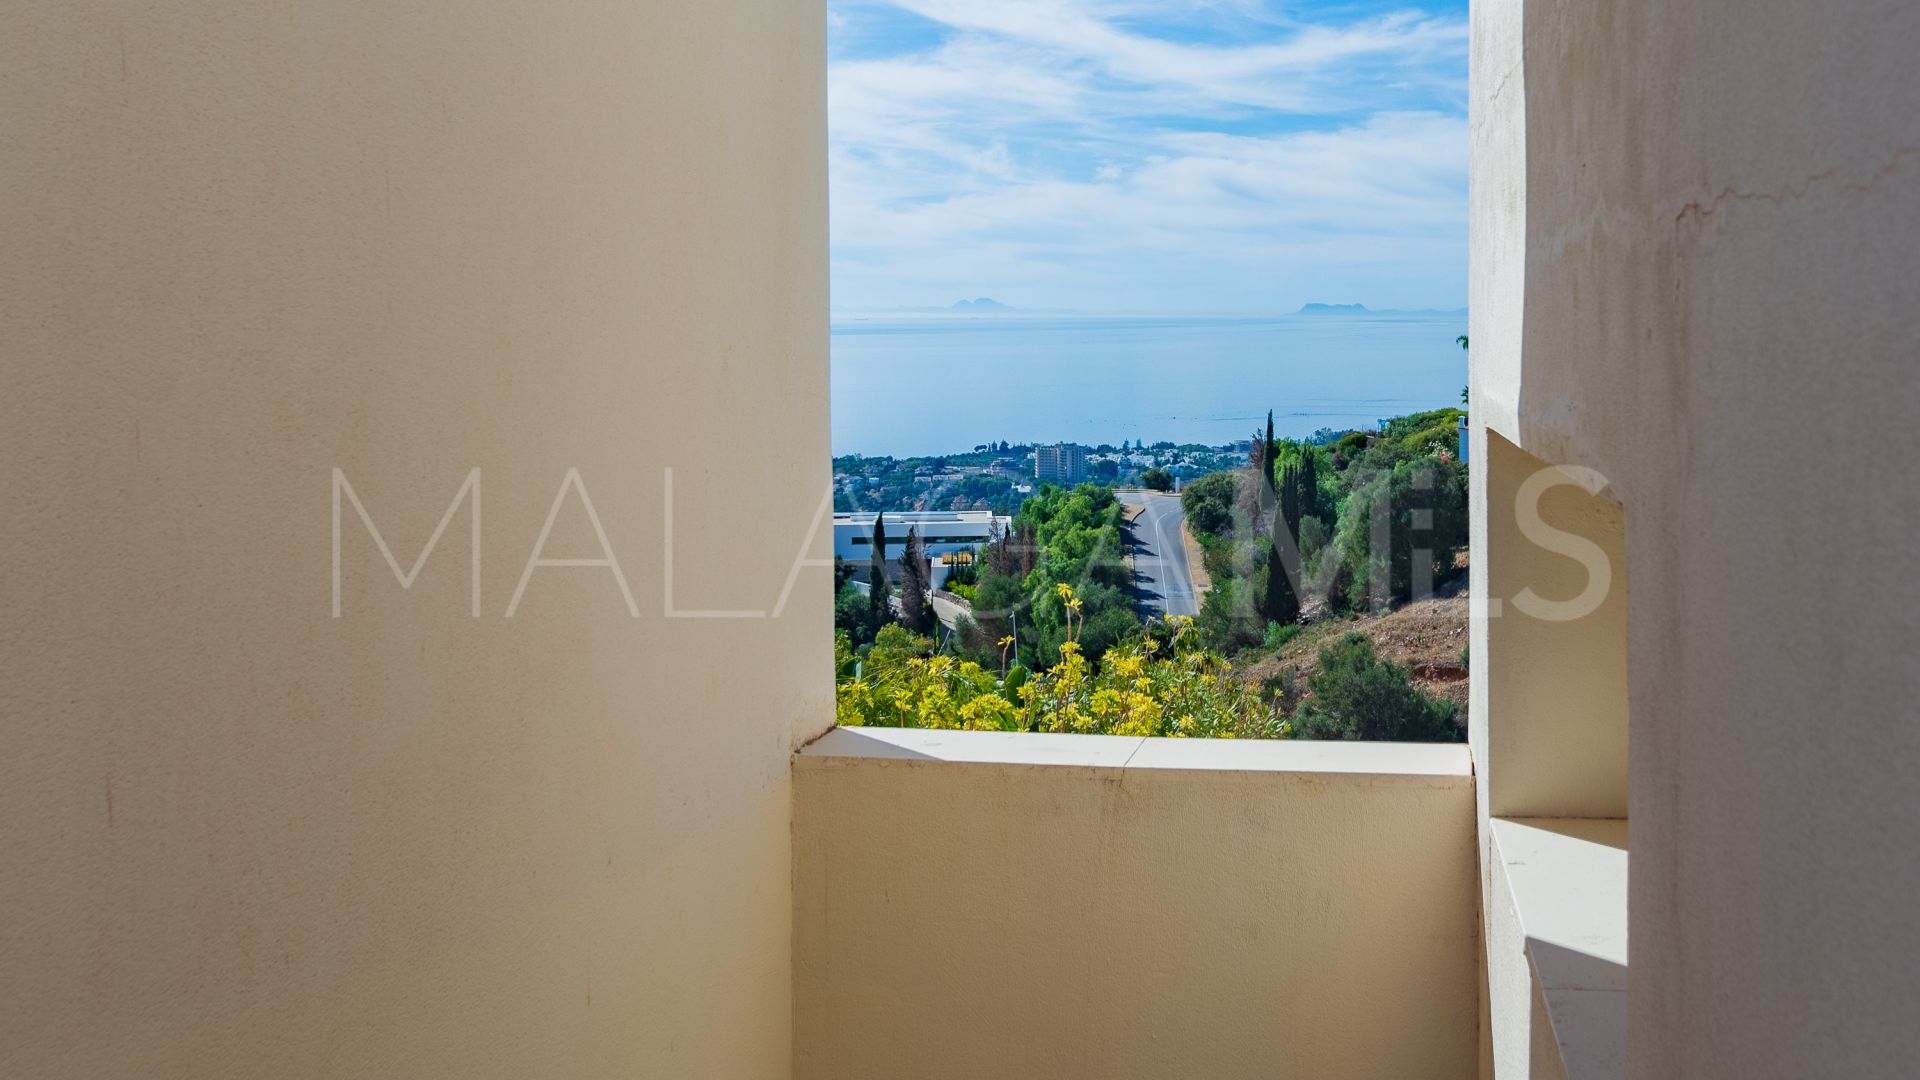 For sale apartment in Marbella with 3 bedrooms